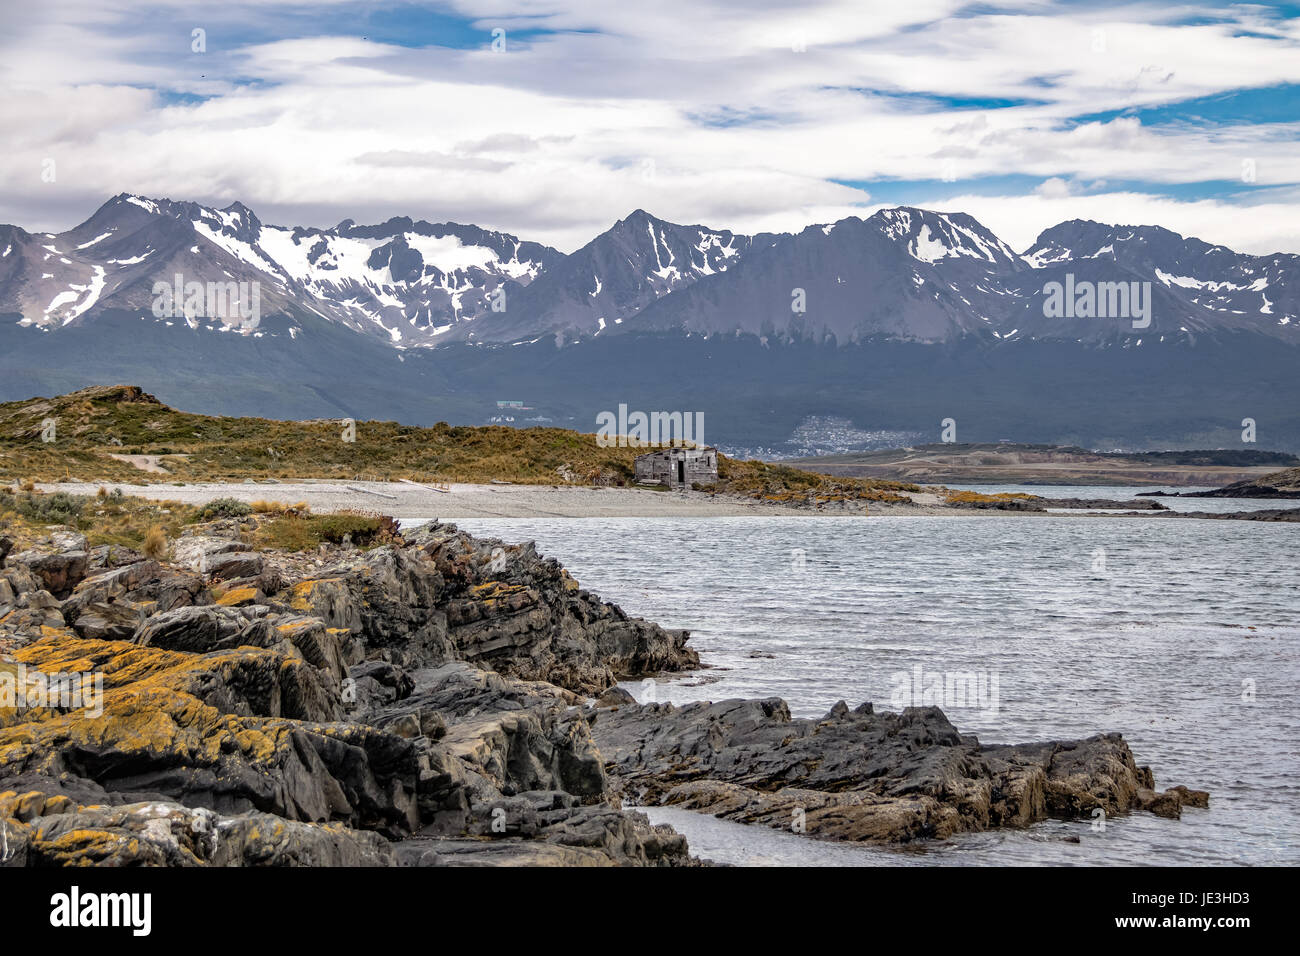 Timber house in Island and mountains view in Beagle Channel - Ushuaia, Tierra del Fuego, Argentina Stock Photo